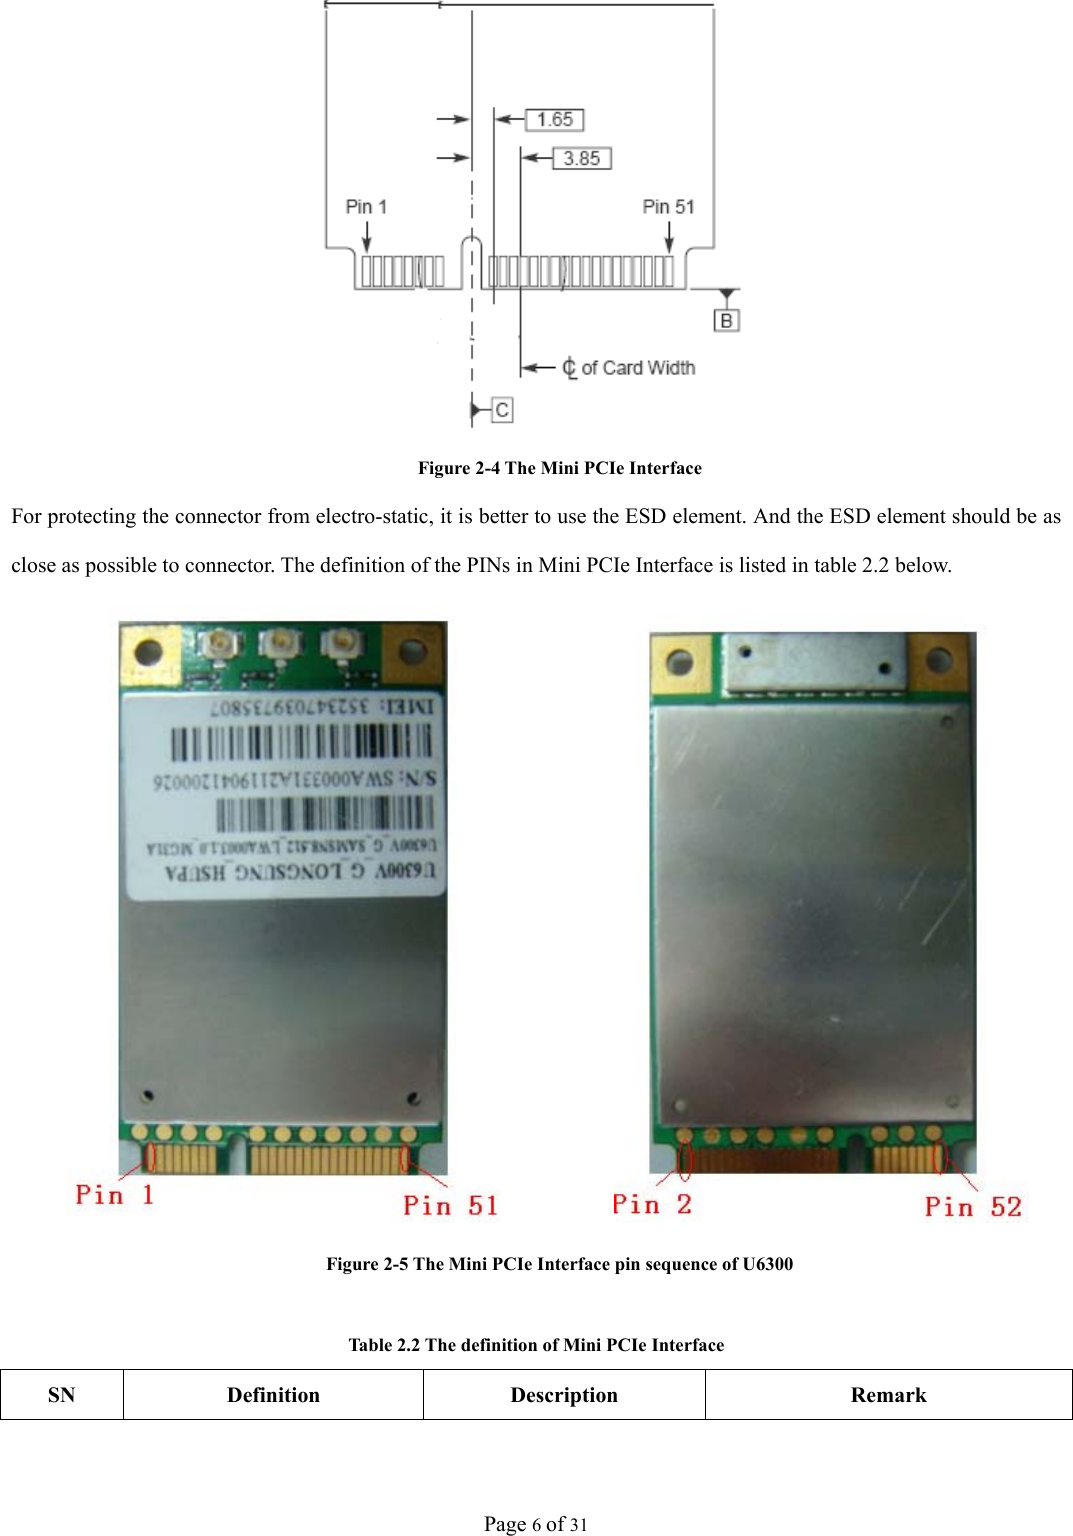 Page 6 of 31  Figure 2-4 The Mini PCIe Interface For protecting the connector from electro-static, it is better to use the ESD element. And the ESD element should be as close as possible to connector. The definition of the PINs in Mini PCIe Interface is listed in table 2.2 below.            Figure 2-5 The Mini PCIe Interface pin sequence of U6300  Table 2.2 The definition of Mini PCIe Interface SN   Definition   Description  Remark 